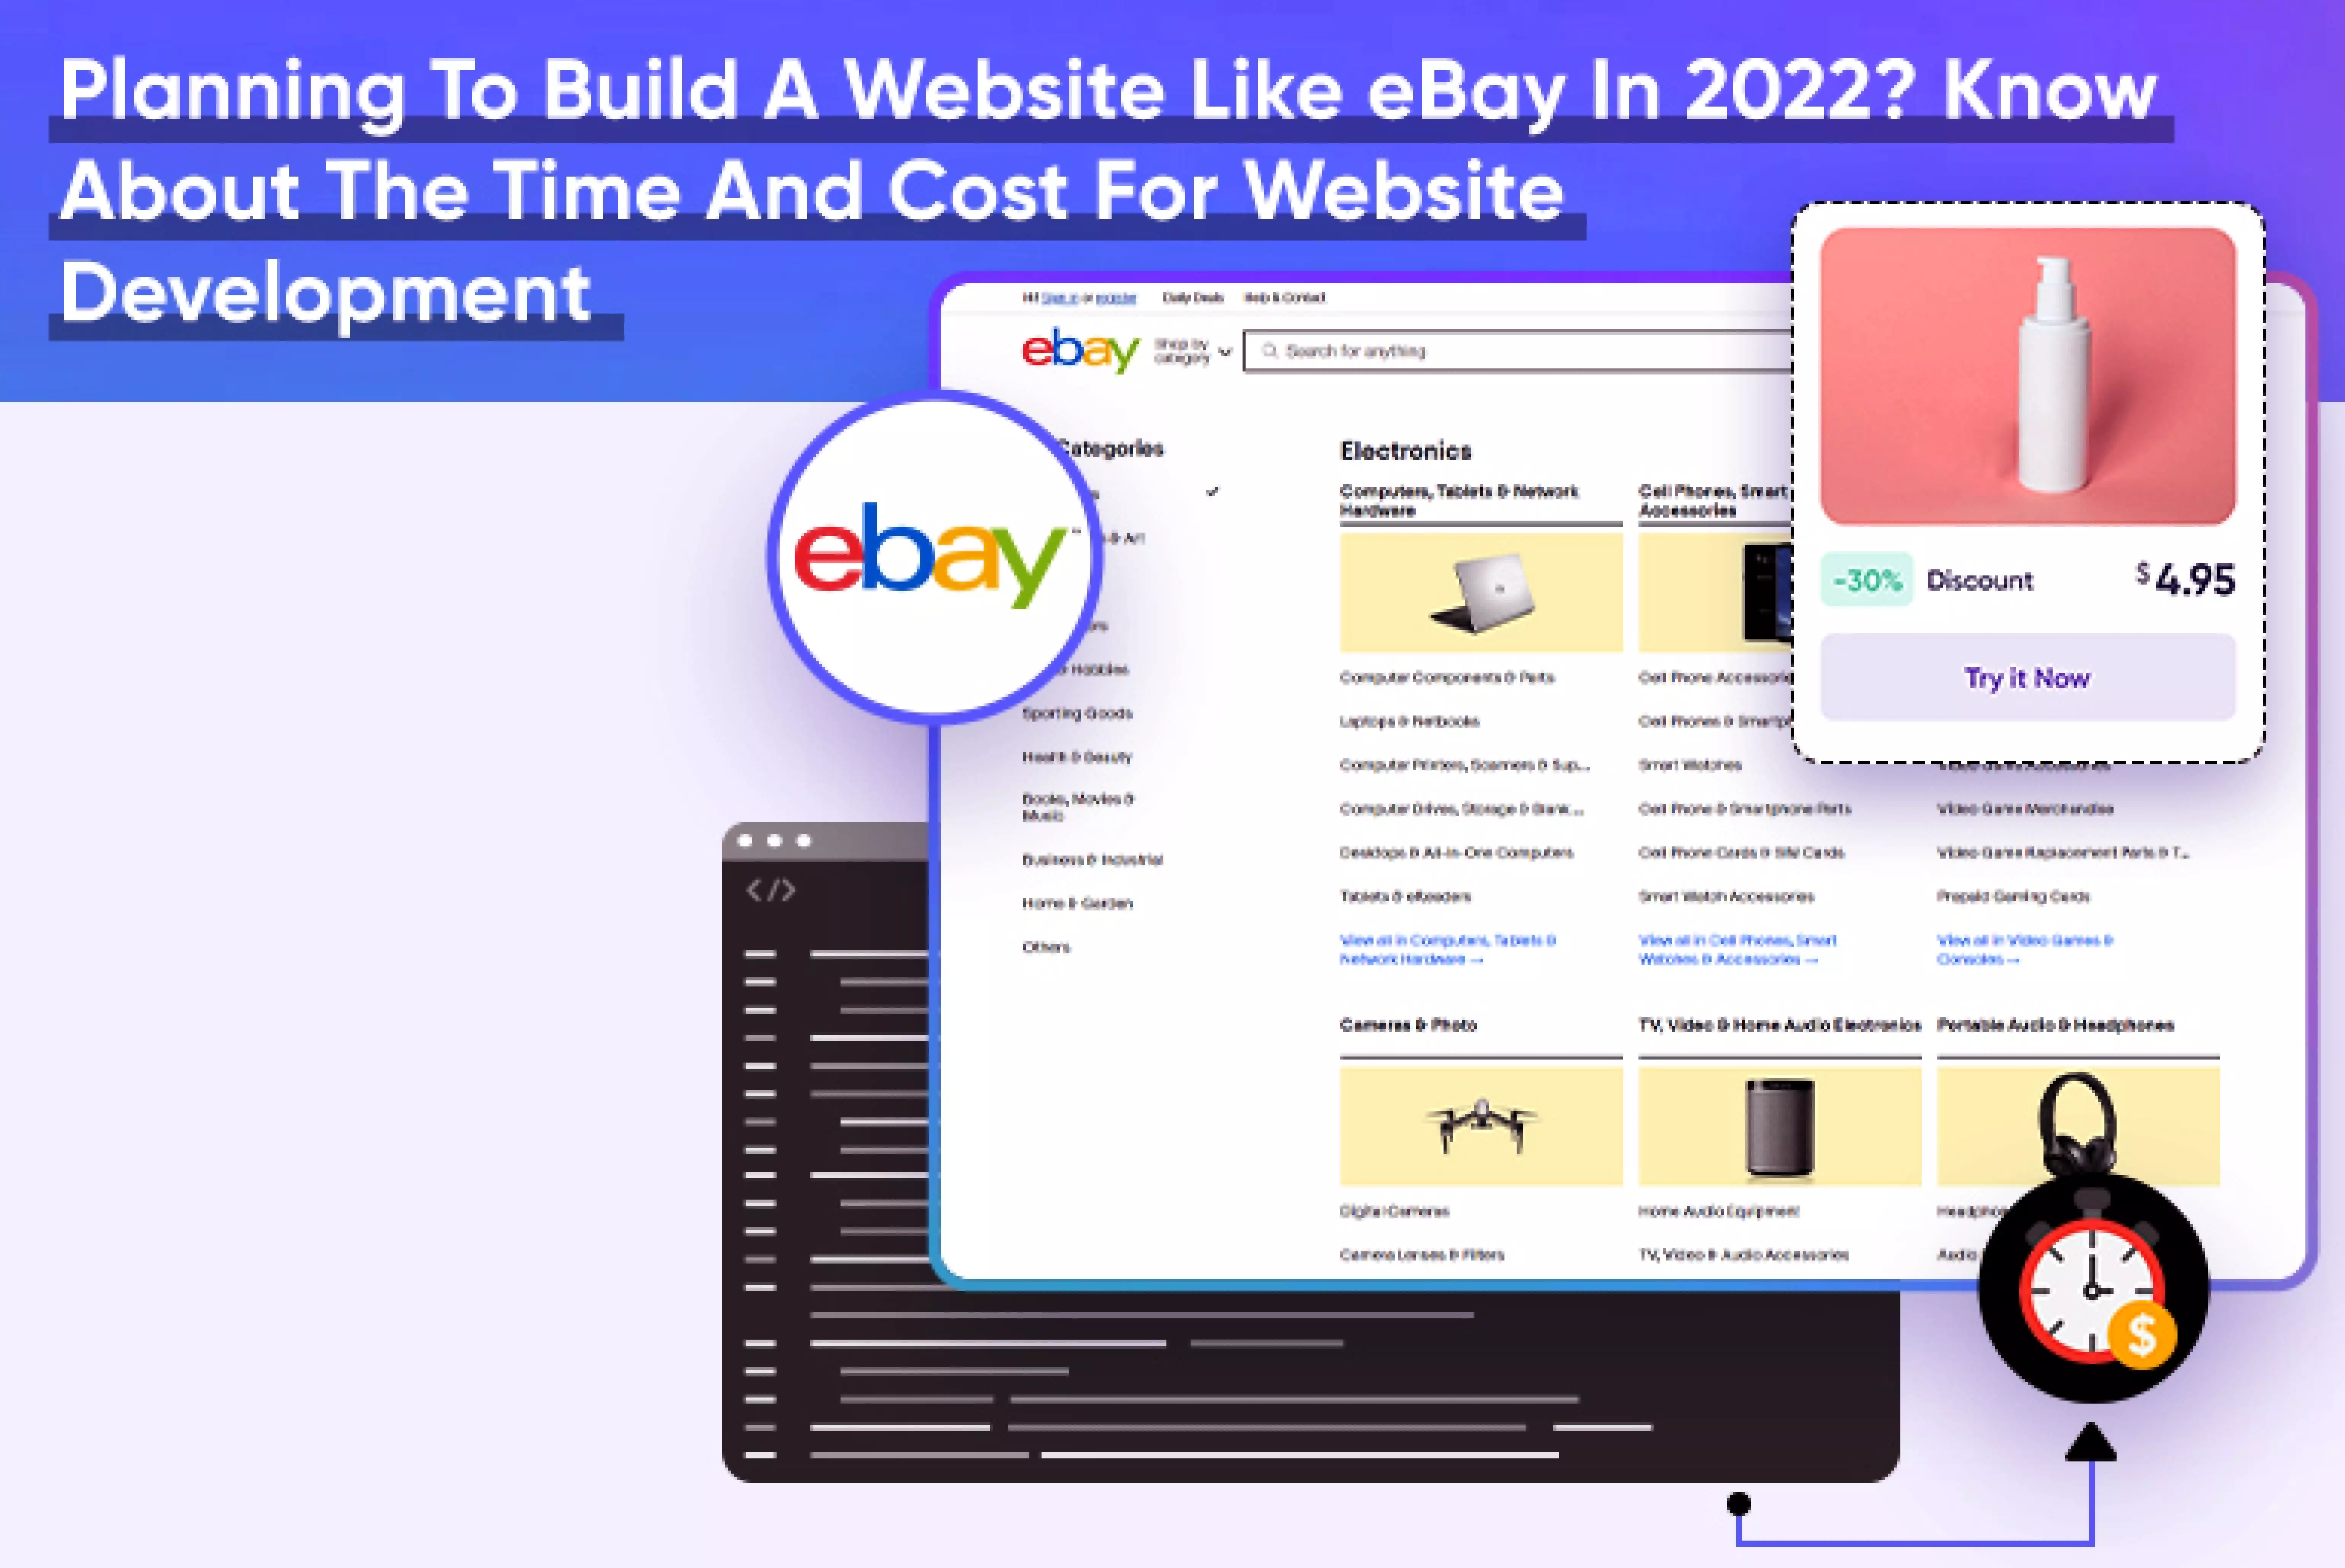 Planning To Build A Website Like eBay In 2022 Know About The Time And Cost_Thum